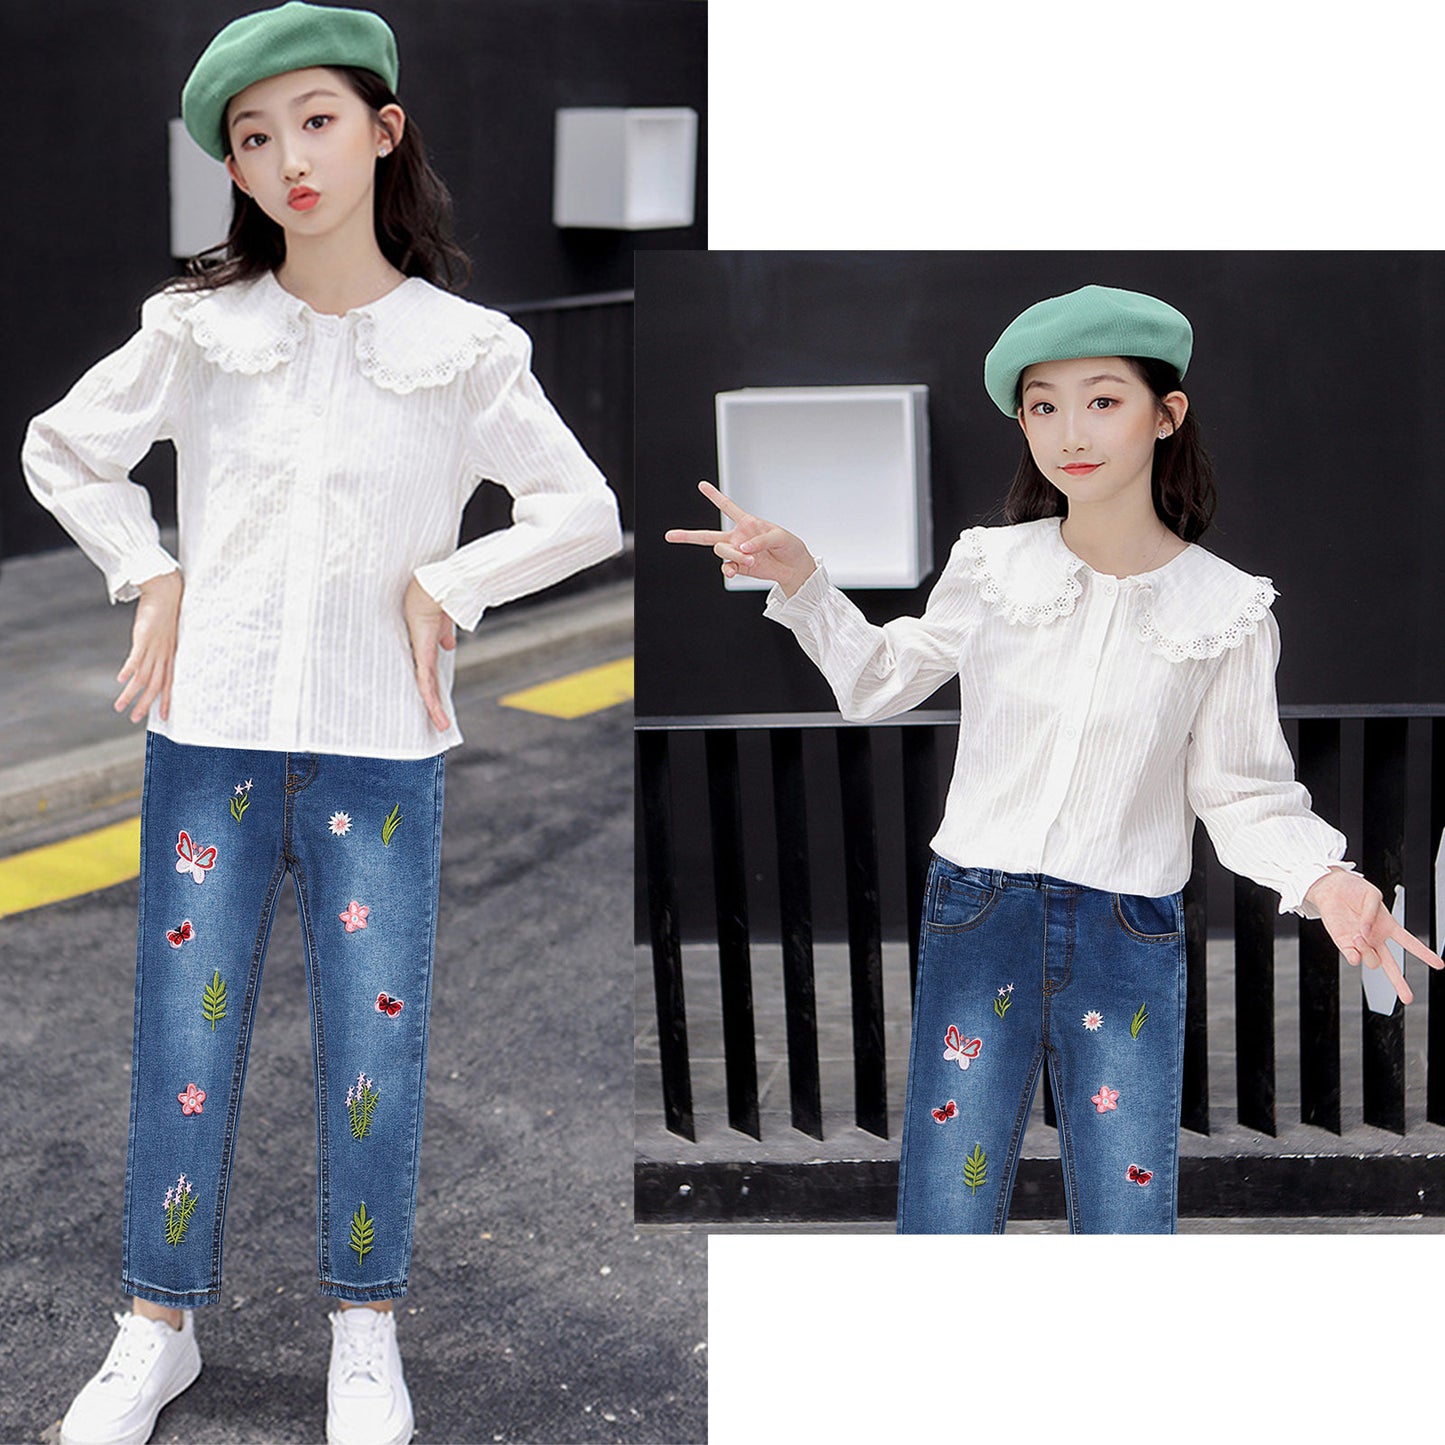 Girls Knitted Pullover Shirt Embroidery Jeans Pants Set